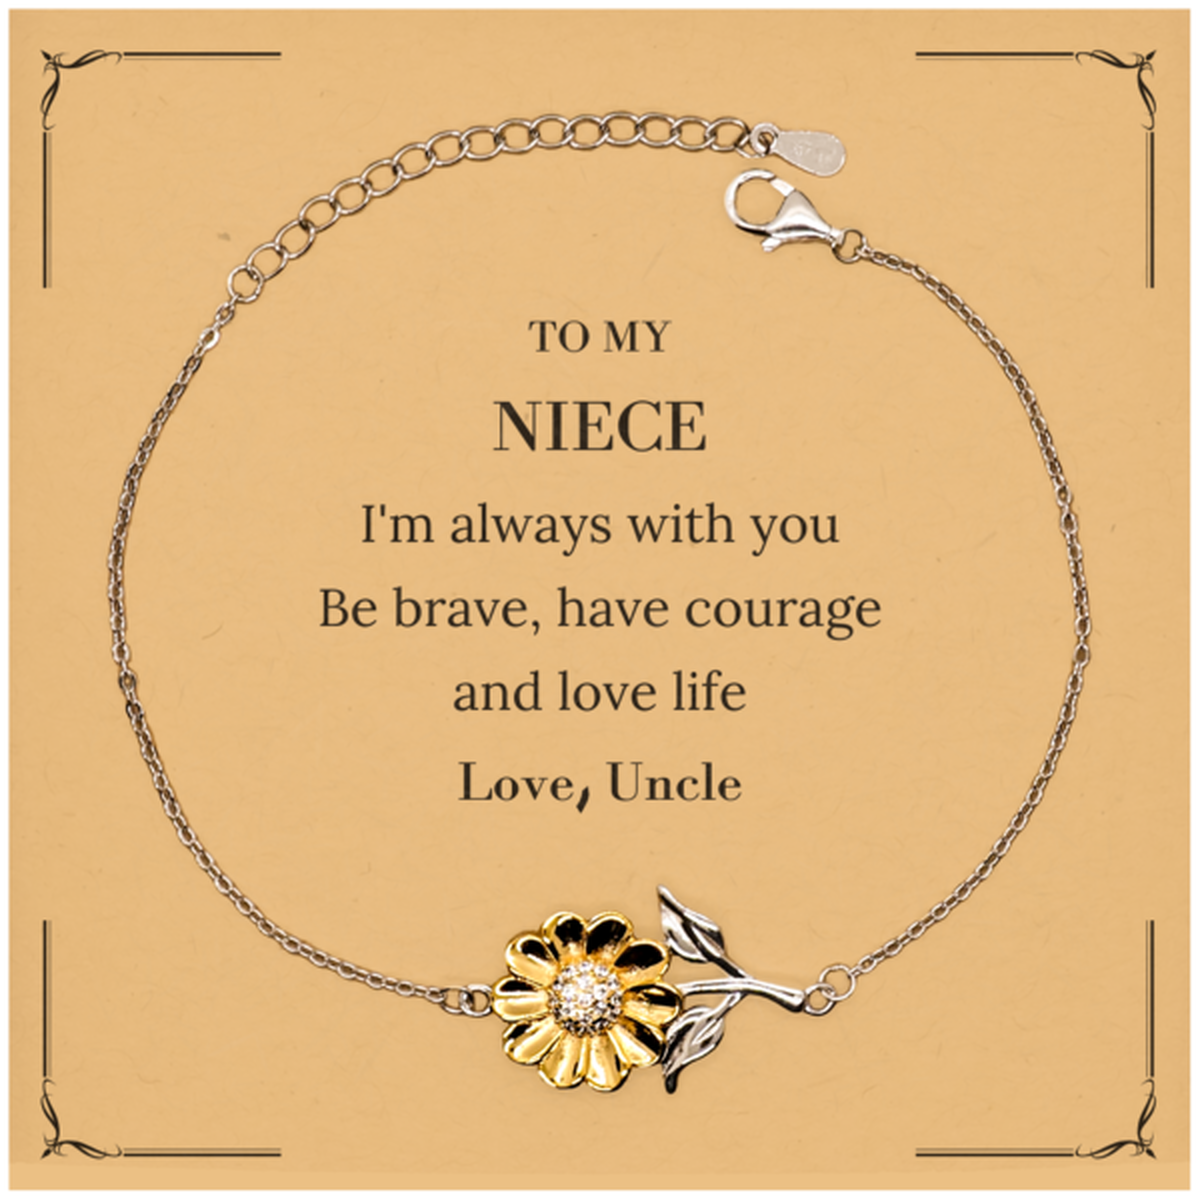 To My Niece Gifts from Uncle, Unique Sunflower Bracelet Inspirational Christmas Birthday Graduation Gifts for Niece I'm always with you. Be brave, have courage and love life. Love, Uncle